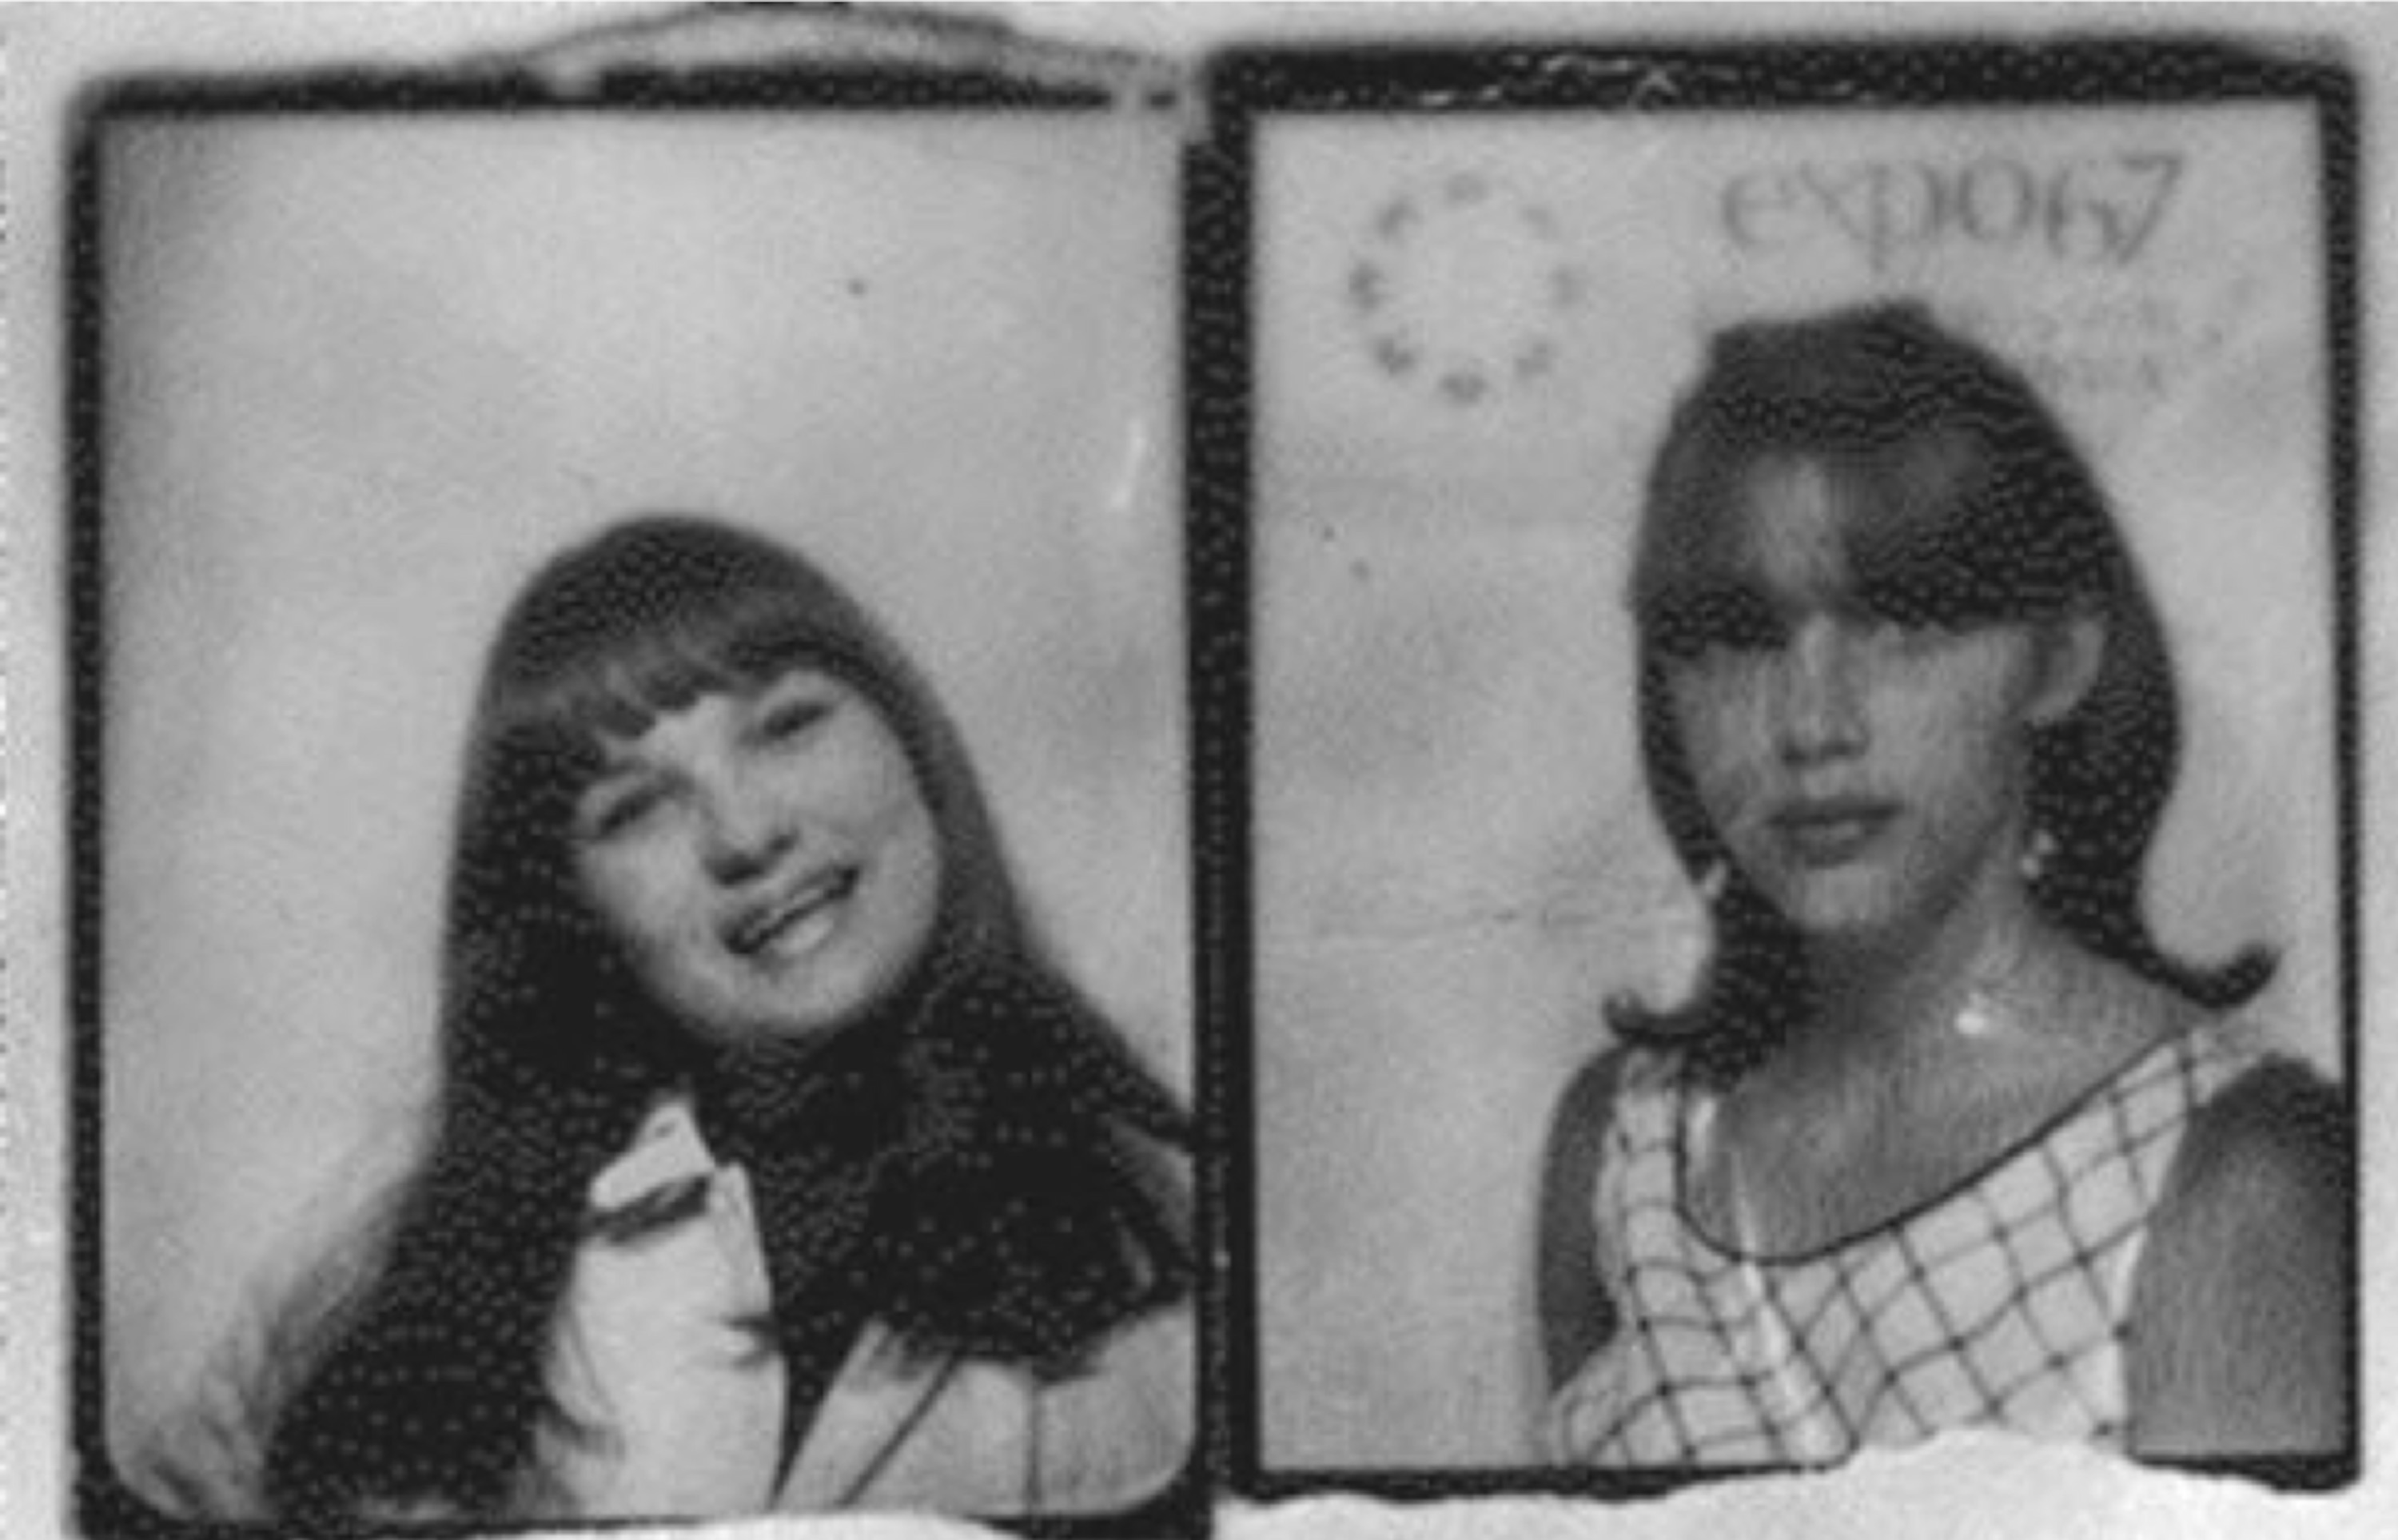 Sandy Stiver, 14, and her sister-in-law Martha Stiver were last seen at Frankford & Kensington Avenues in Philadelphia, sometime in 1968. (DoeNetwork.com)